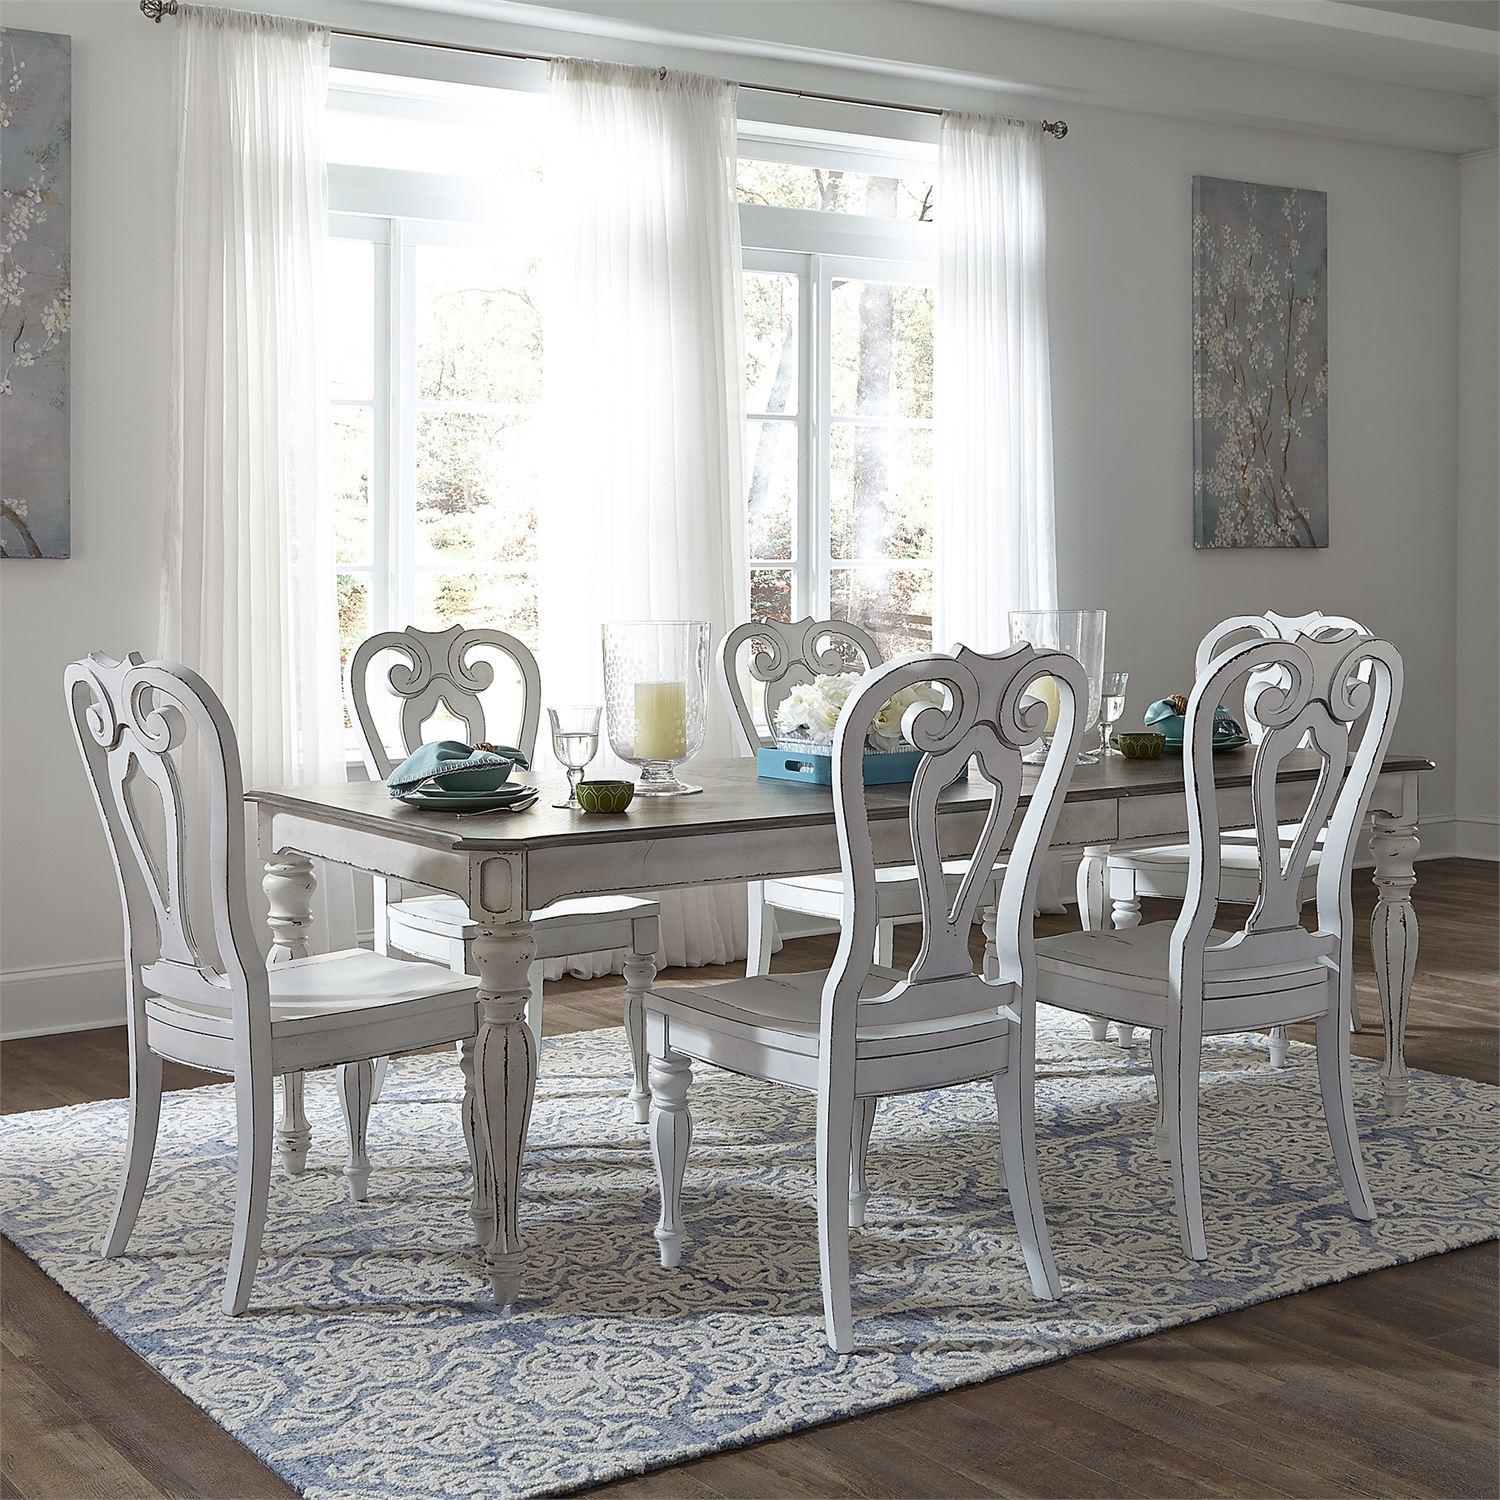 European Traditional Dining Table Set Magnolia Manor  (244-DR) Dining Room Set 244-DR-O7RLS in White 